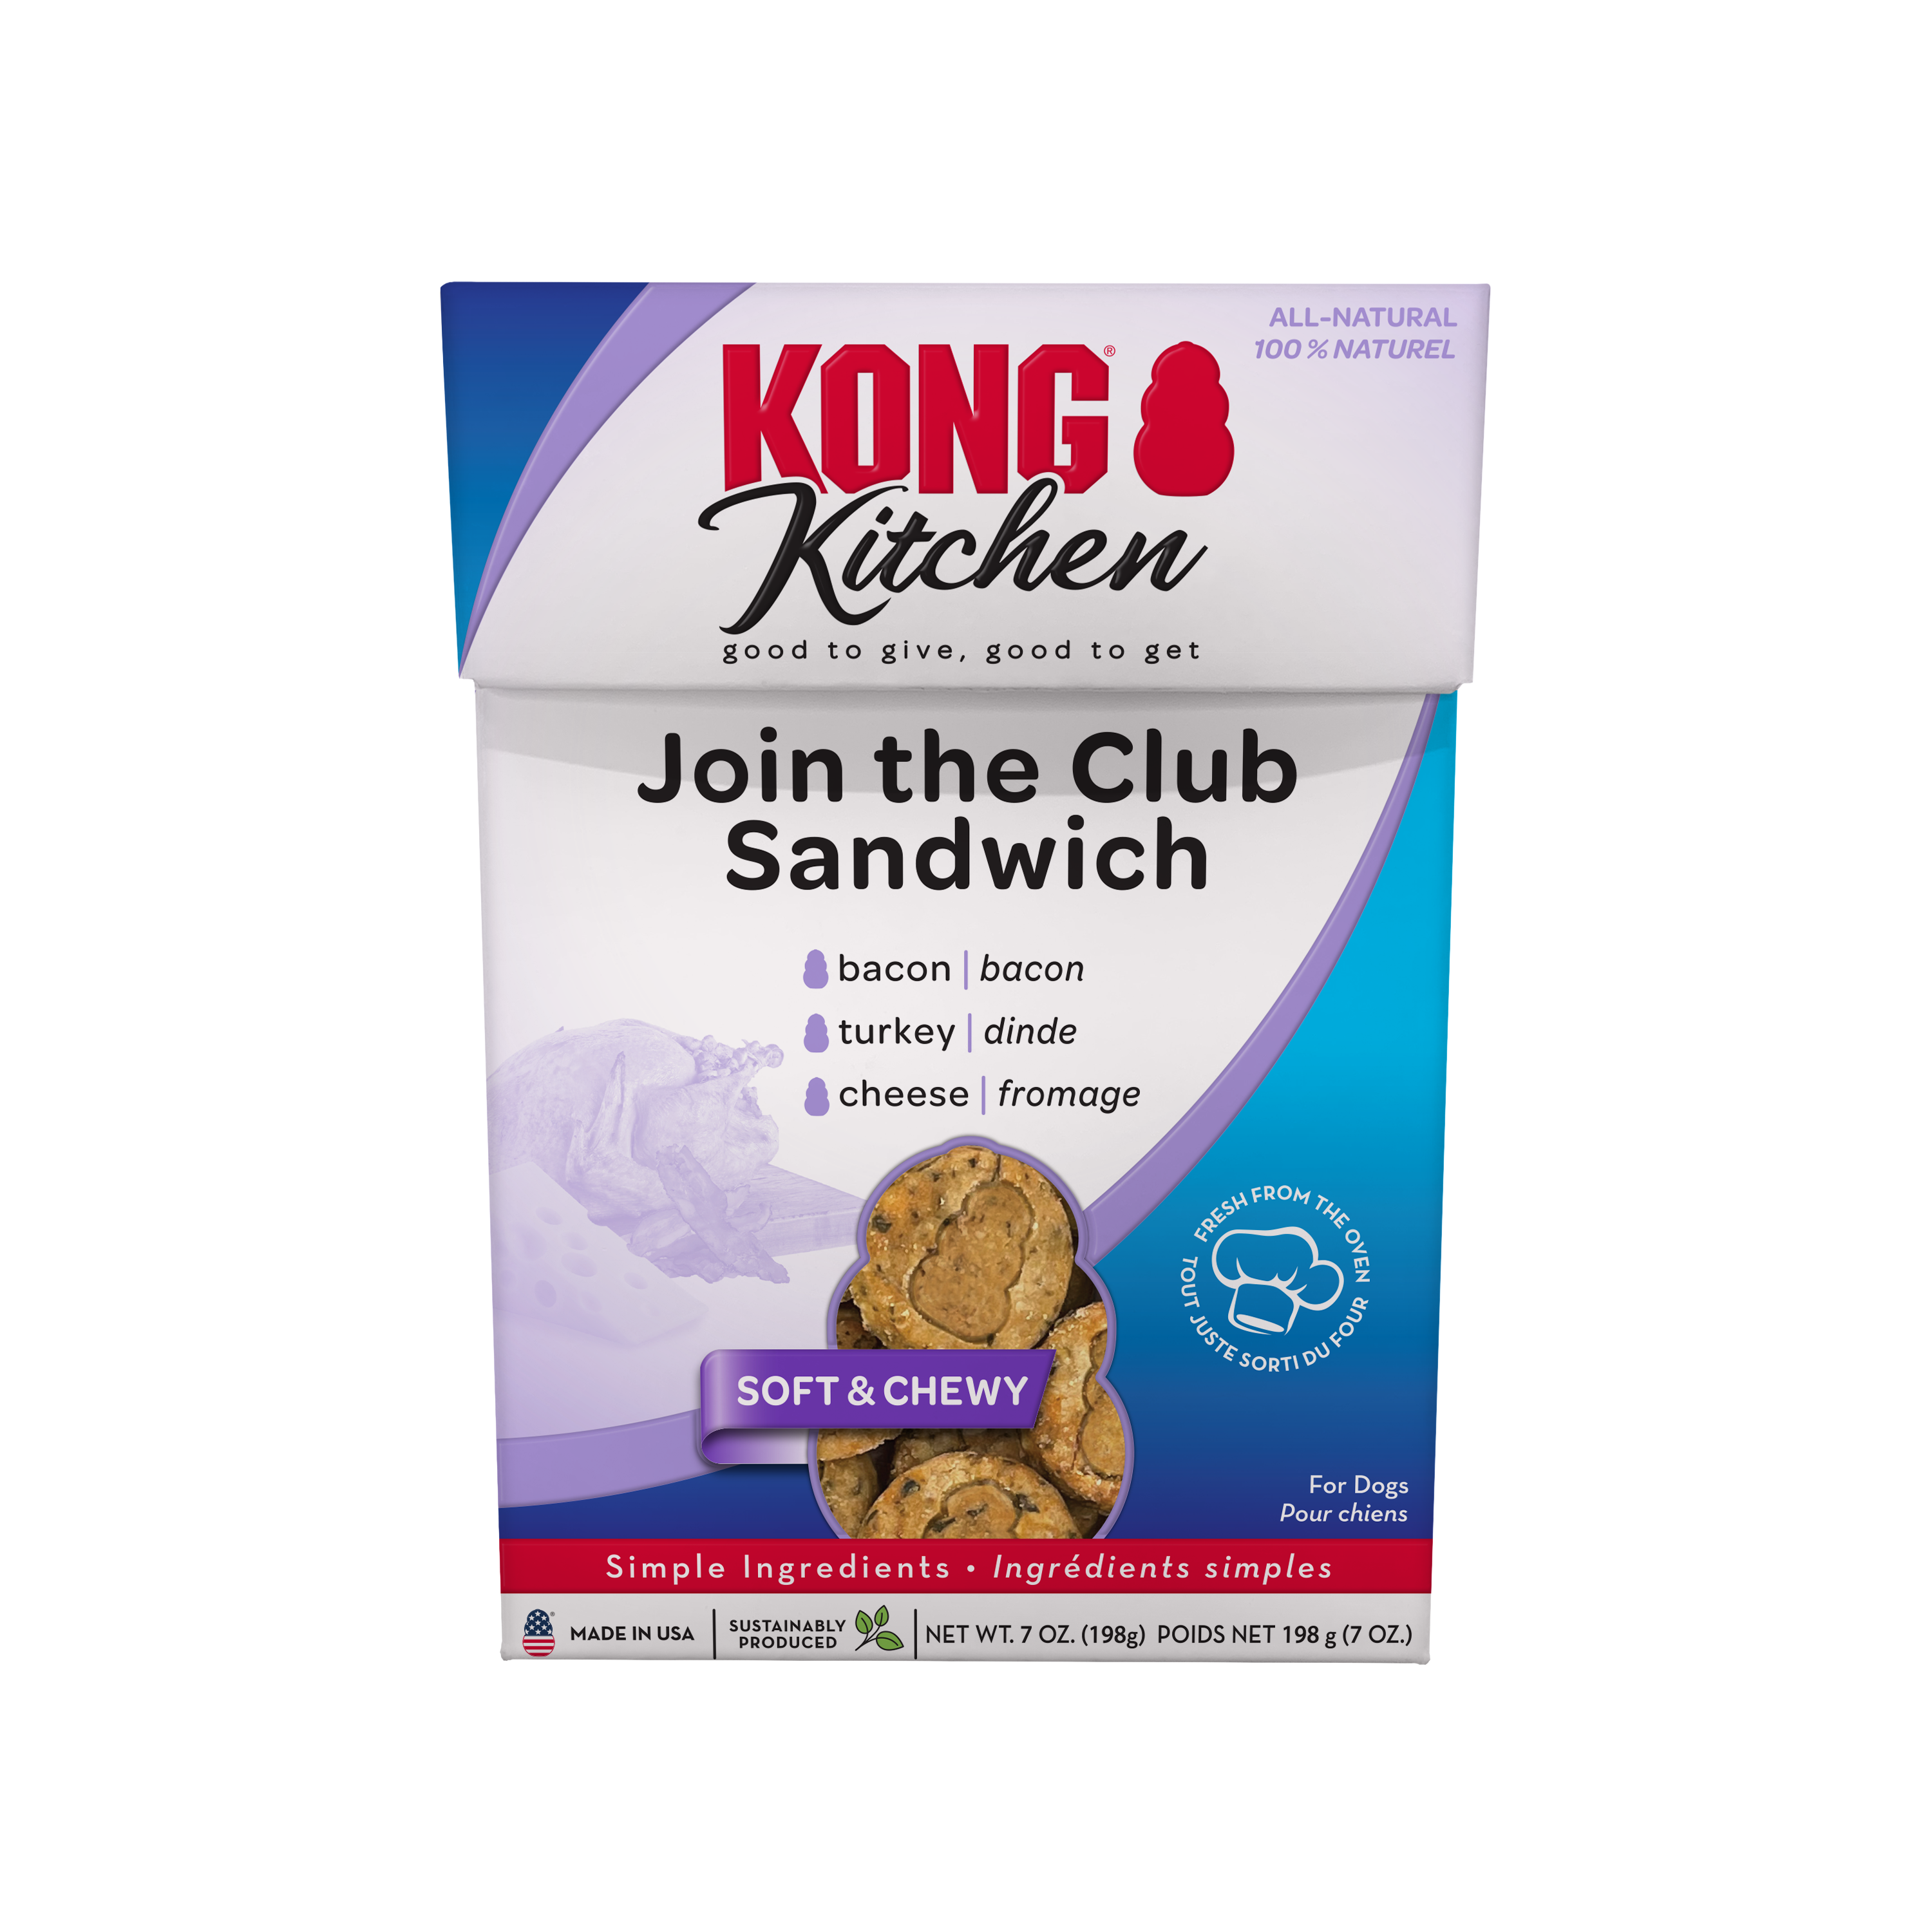 KONG Kitchen Soft & Chewy Join The Club Sandwitch onpack imagen de producto